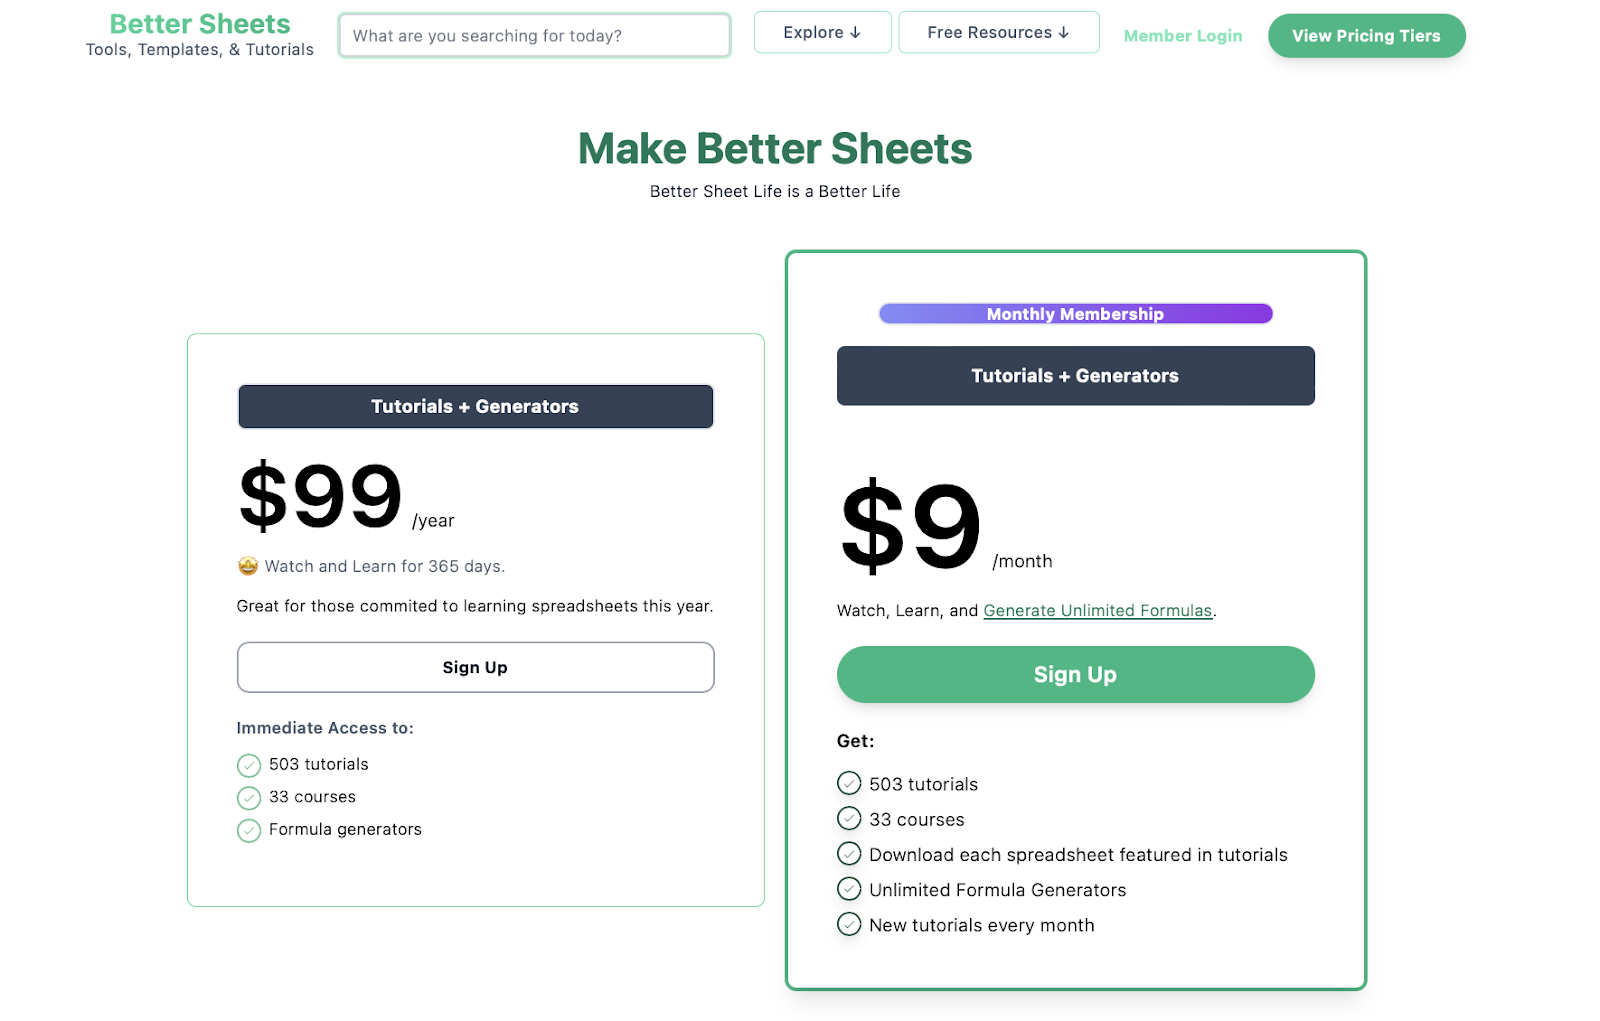 better sheets membership site pricing 